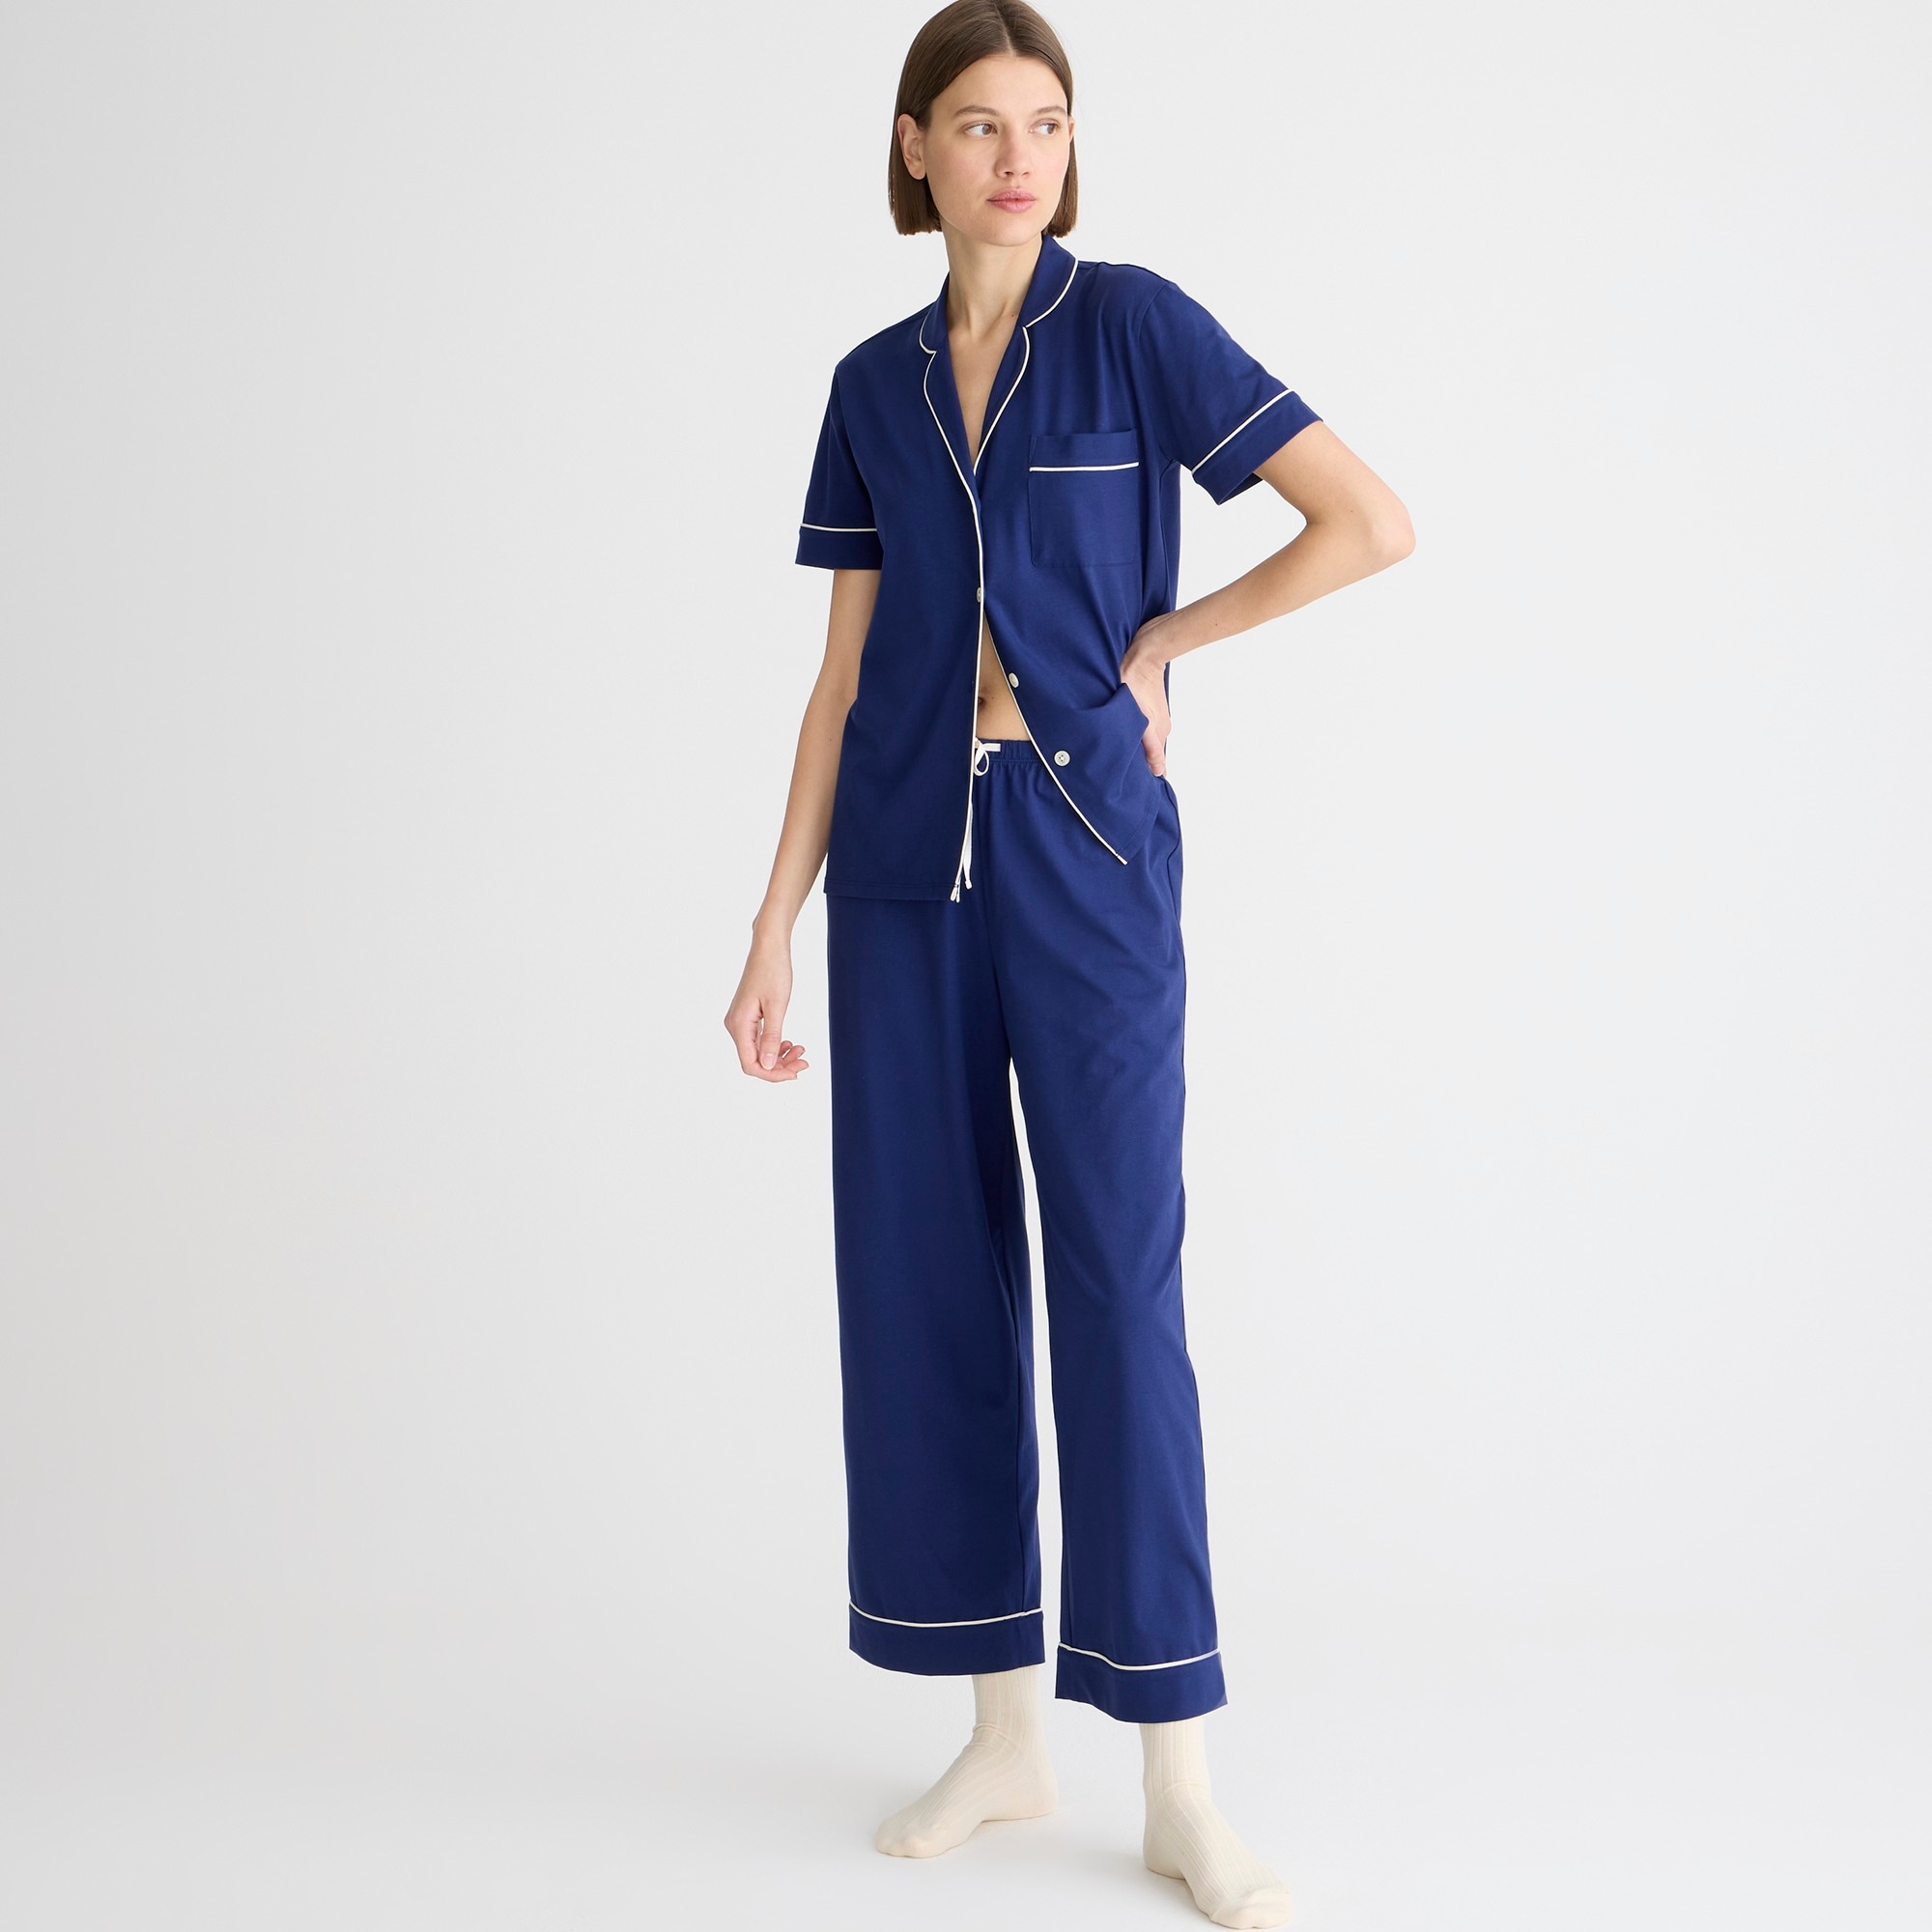  Short-sleeve pajama pant set in dreamy cotton blend